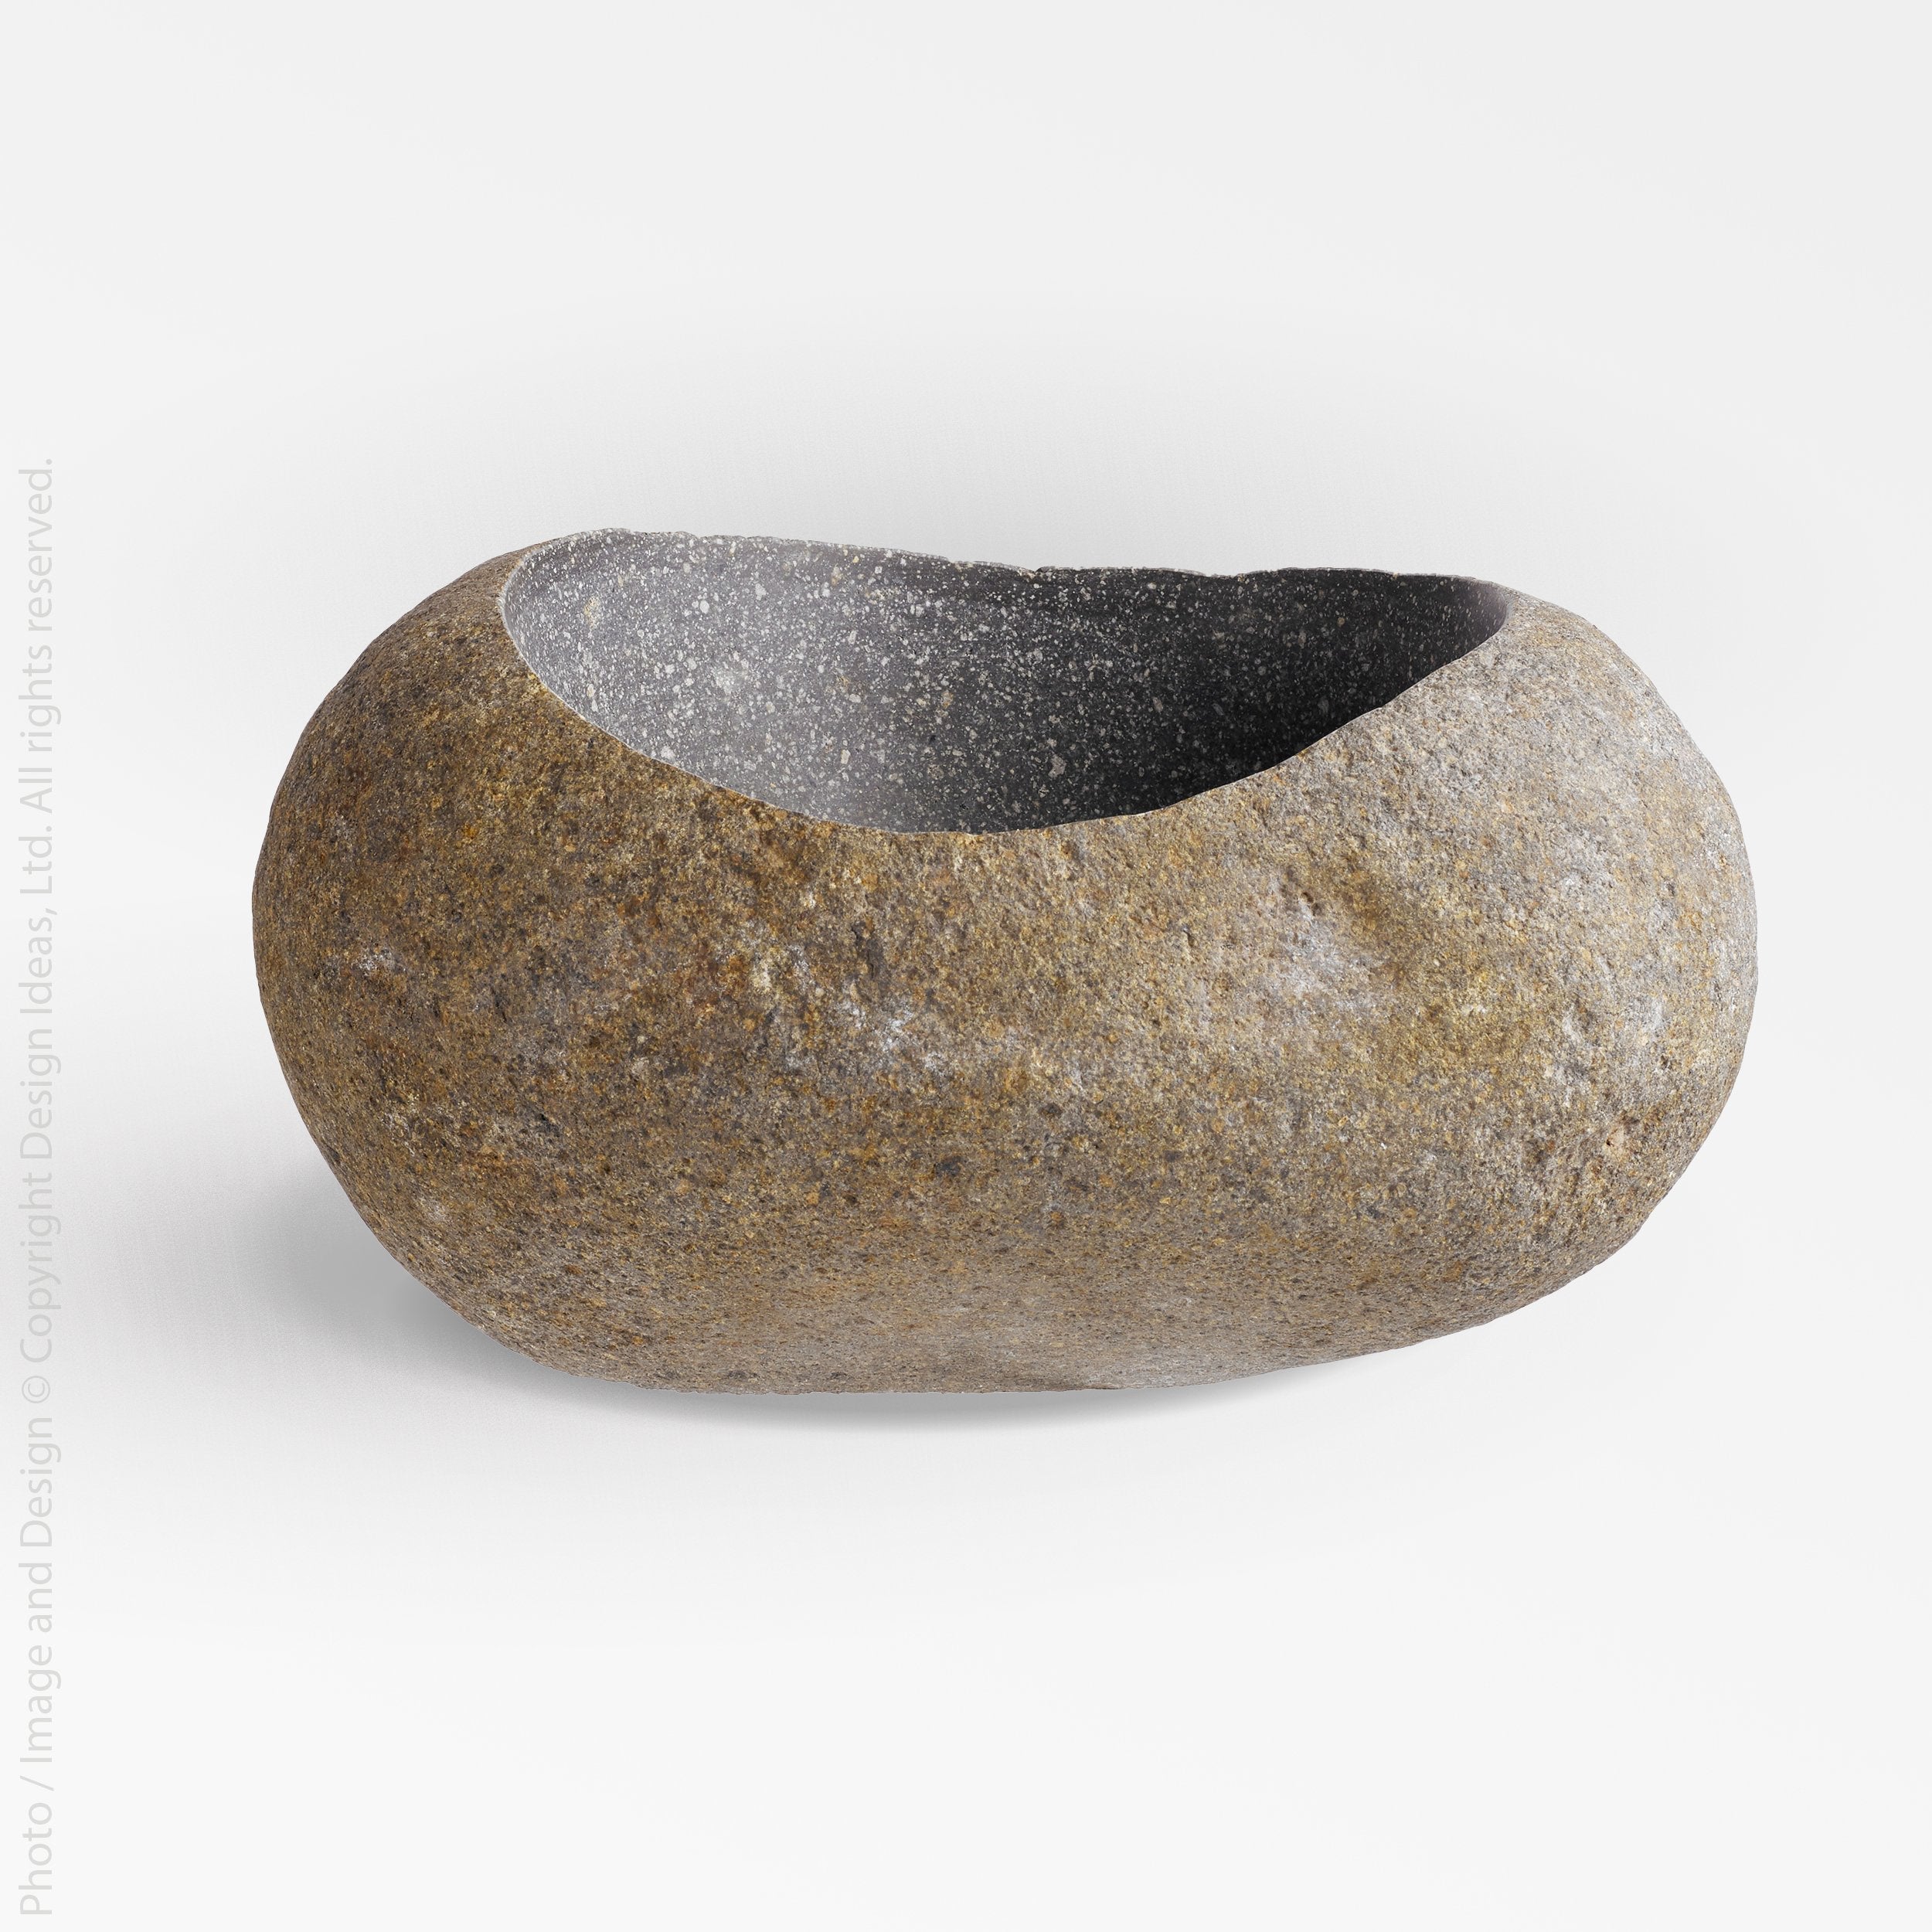 Stoneshard™ bowl (7.9 x 8.7 x 4.3 in.) - Gray | Image 1 | Premium Bowl from the Stoneshard collection | made with Riverstone for long lasting use | texxture